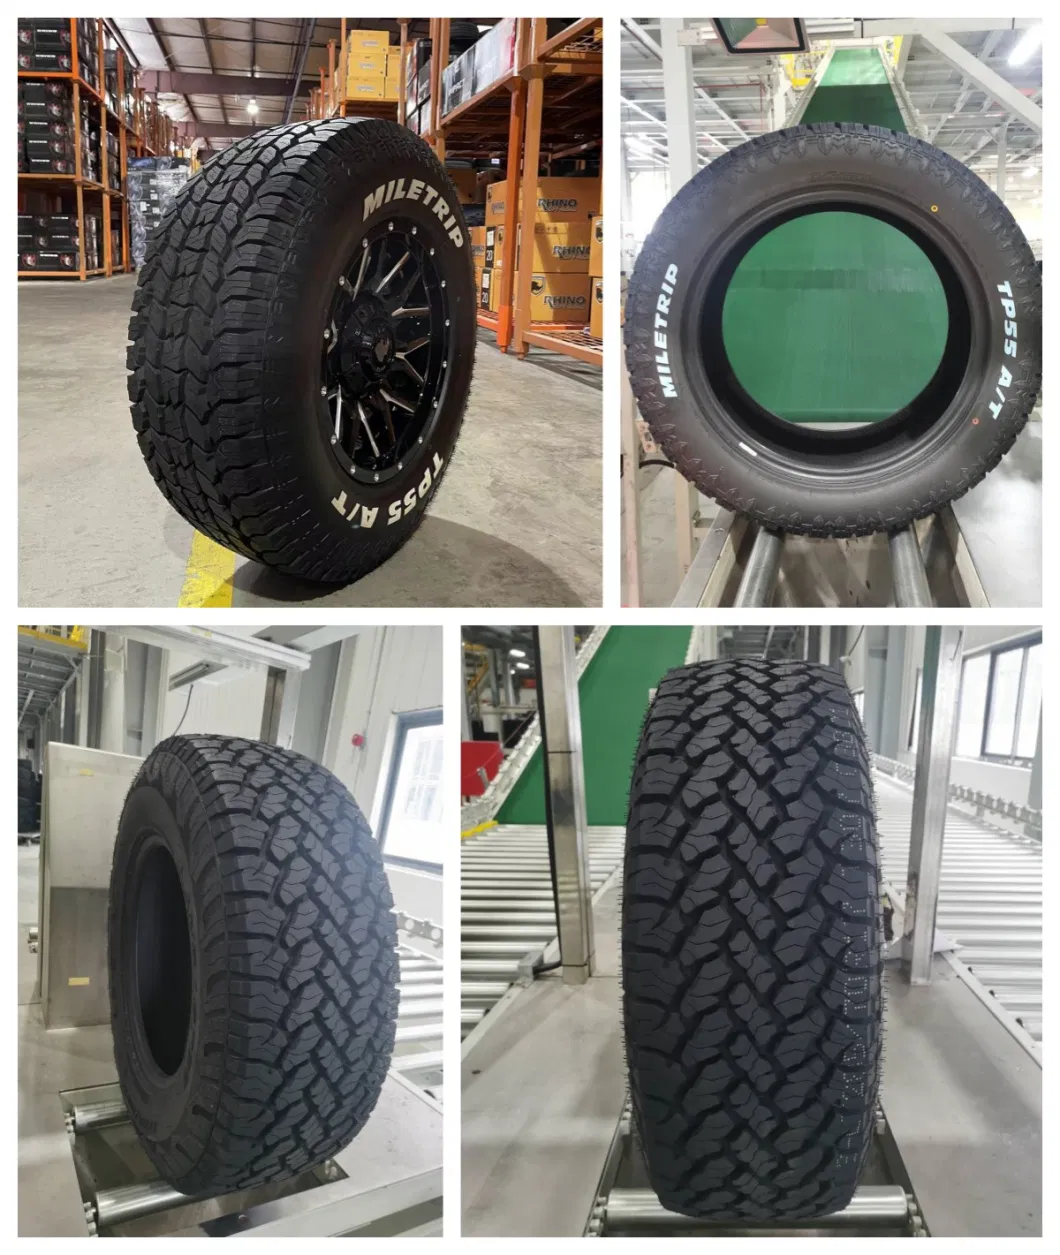 4x4 on&off road MILETRIP Brand PCR All terrain tyres 285/55R20 116XL T Thai-made high quality nice price WSW White side wall Whole sale price radial new tires